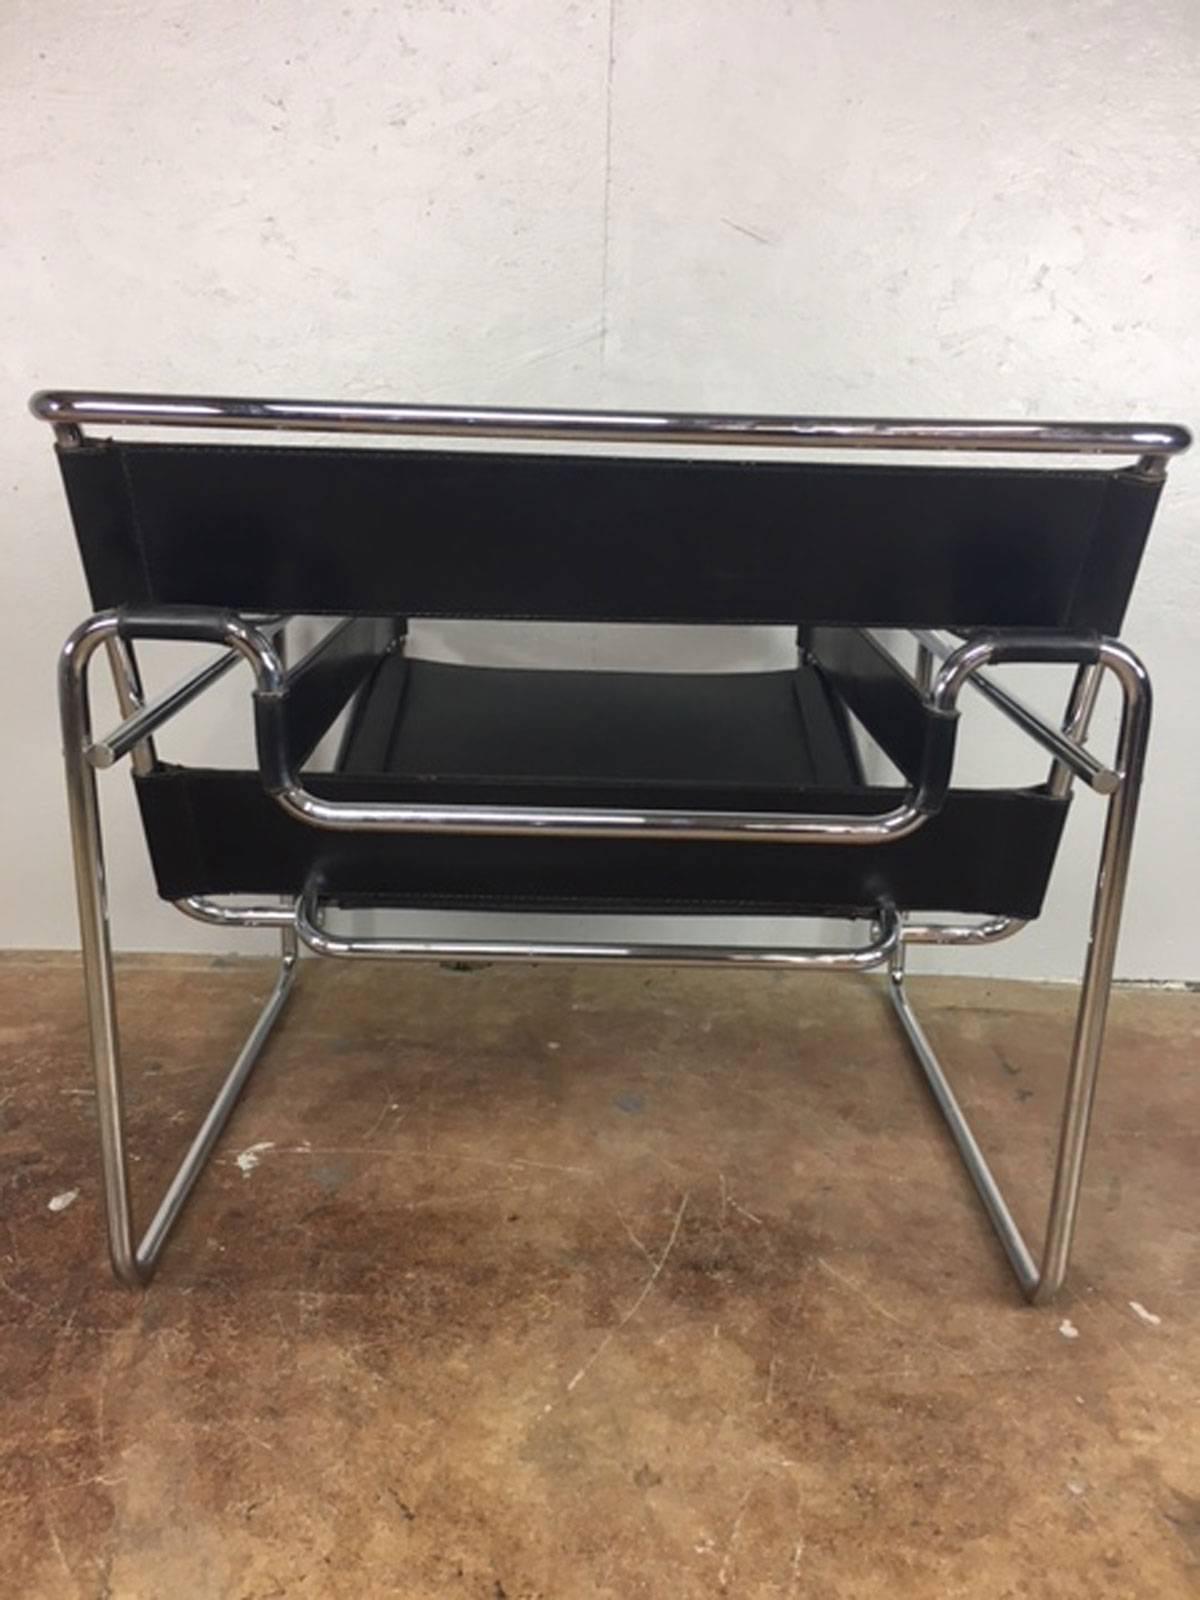 Authentic Marcel Breuer designed Wassily chair made in Italy for Stendig. 

Chrome tube construction with the authentic chrome tube ends. Black belting leather straps are in excellent condition. Tight and taut. Stendig label on bottom. 

Seat